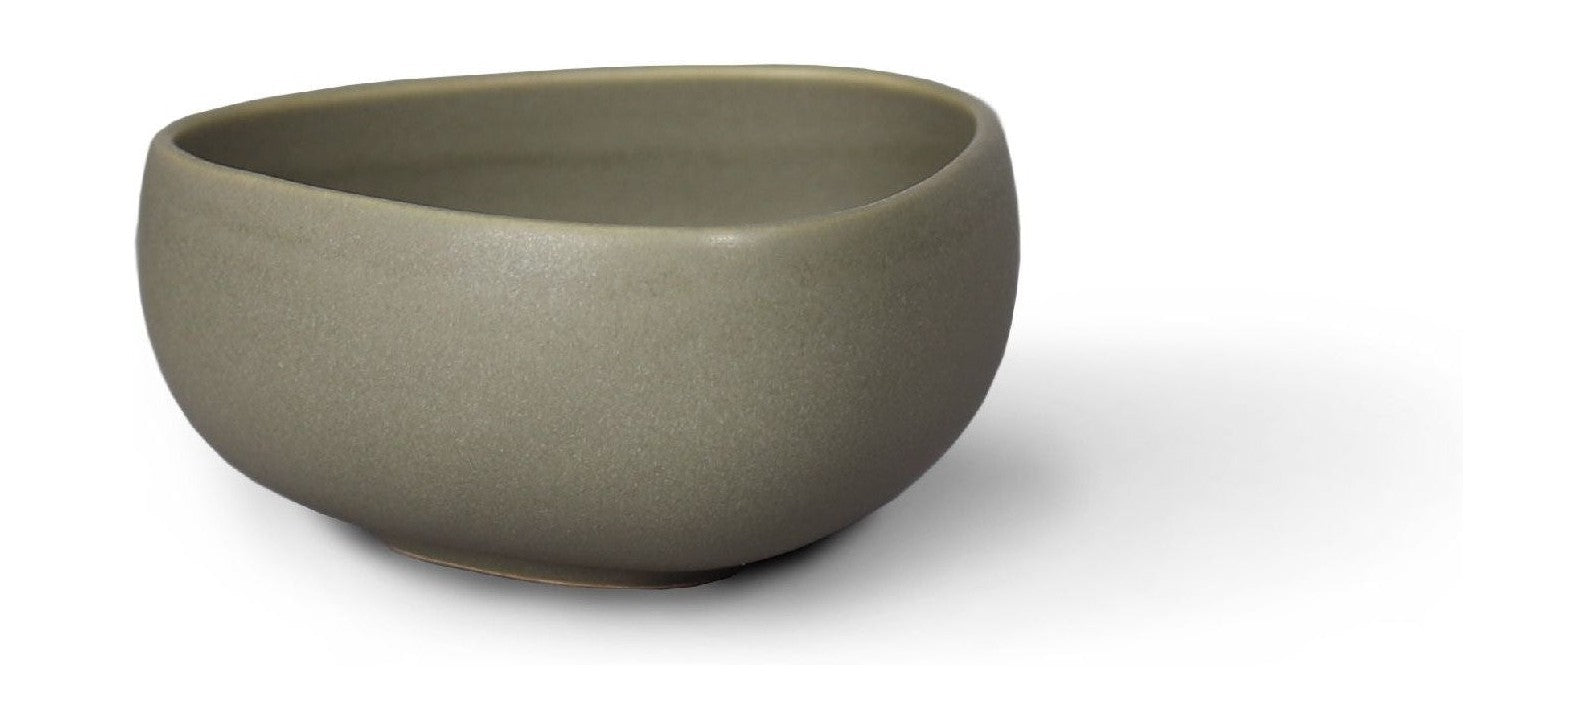 Ro Collection Signature Bowl Small, Pale Green